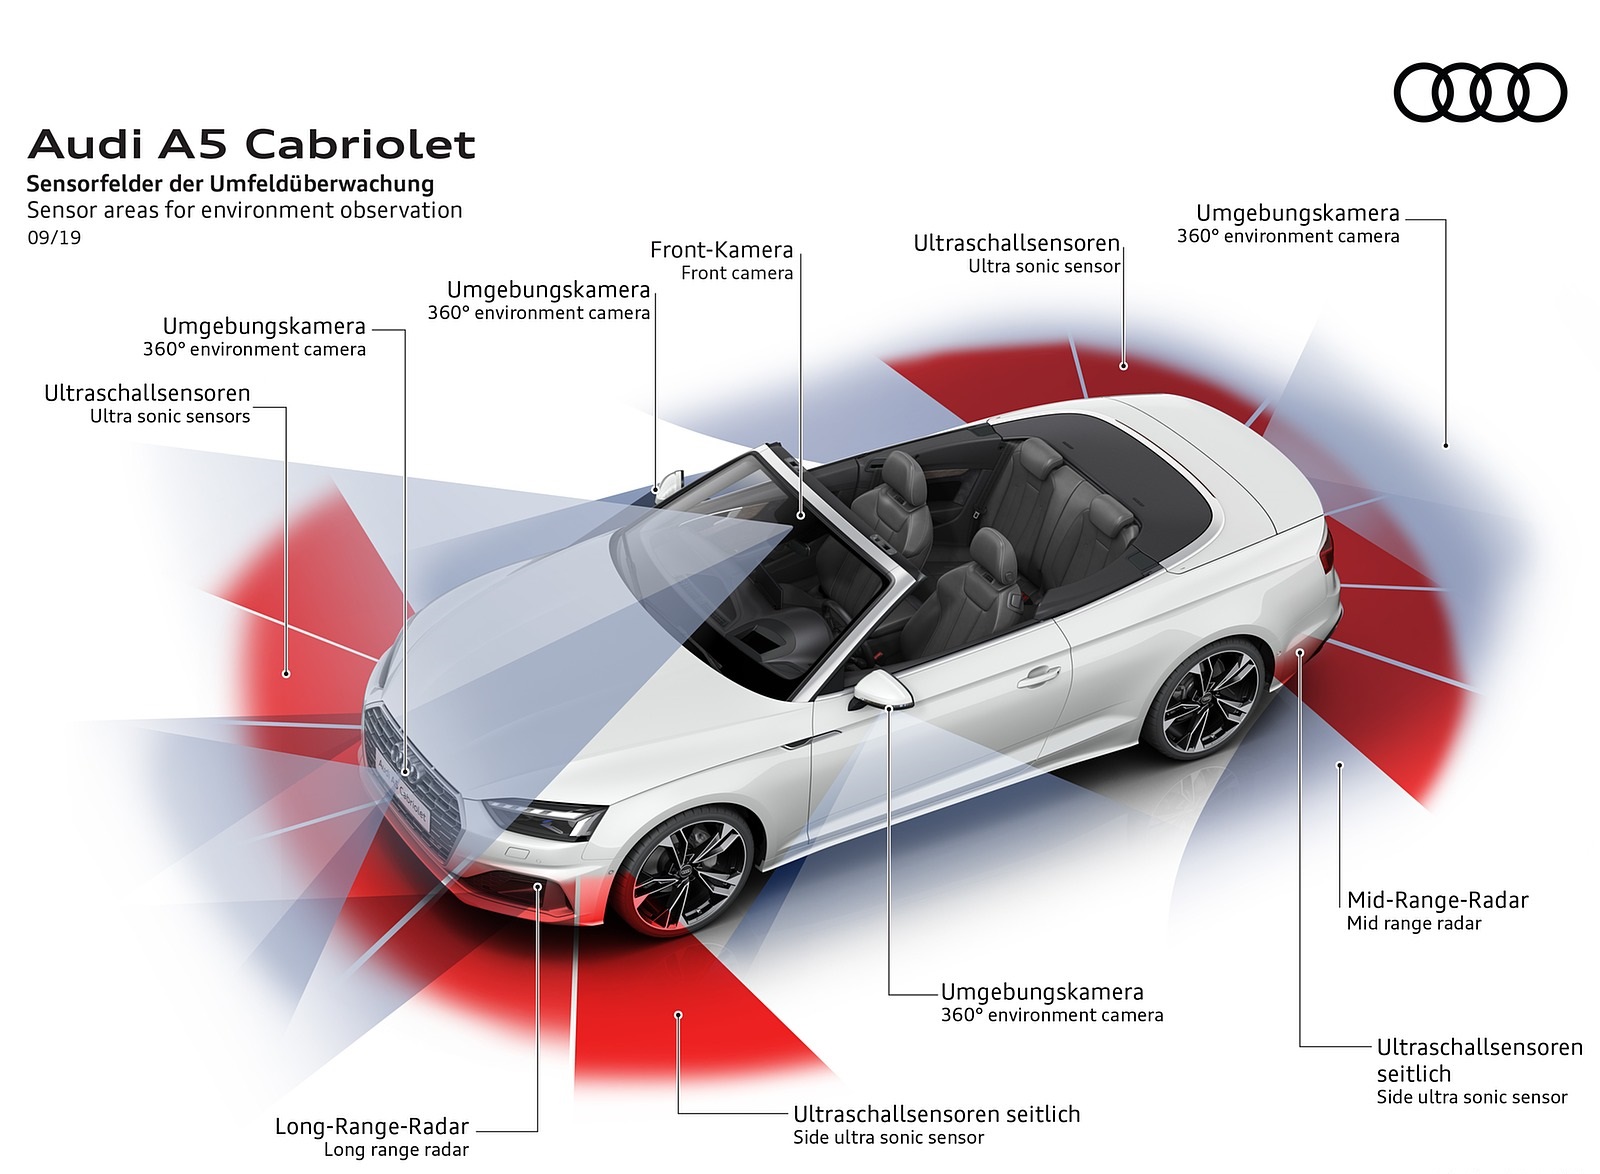 2020 Audi A5 Cabriolet Sensor areas for environment observation Wallpapers #28 of 29